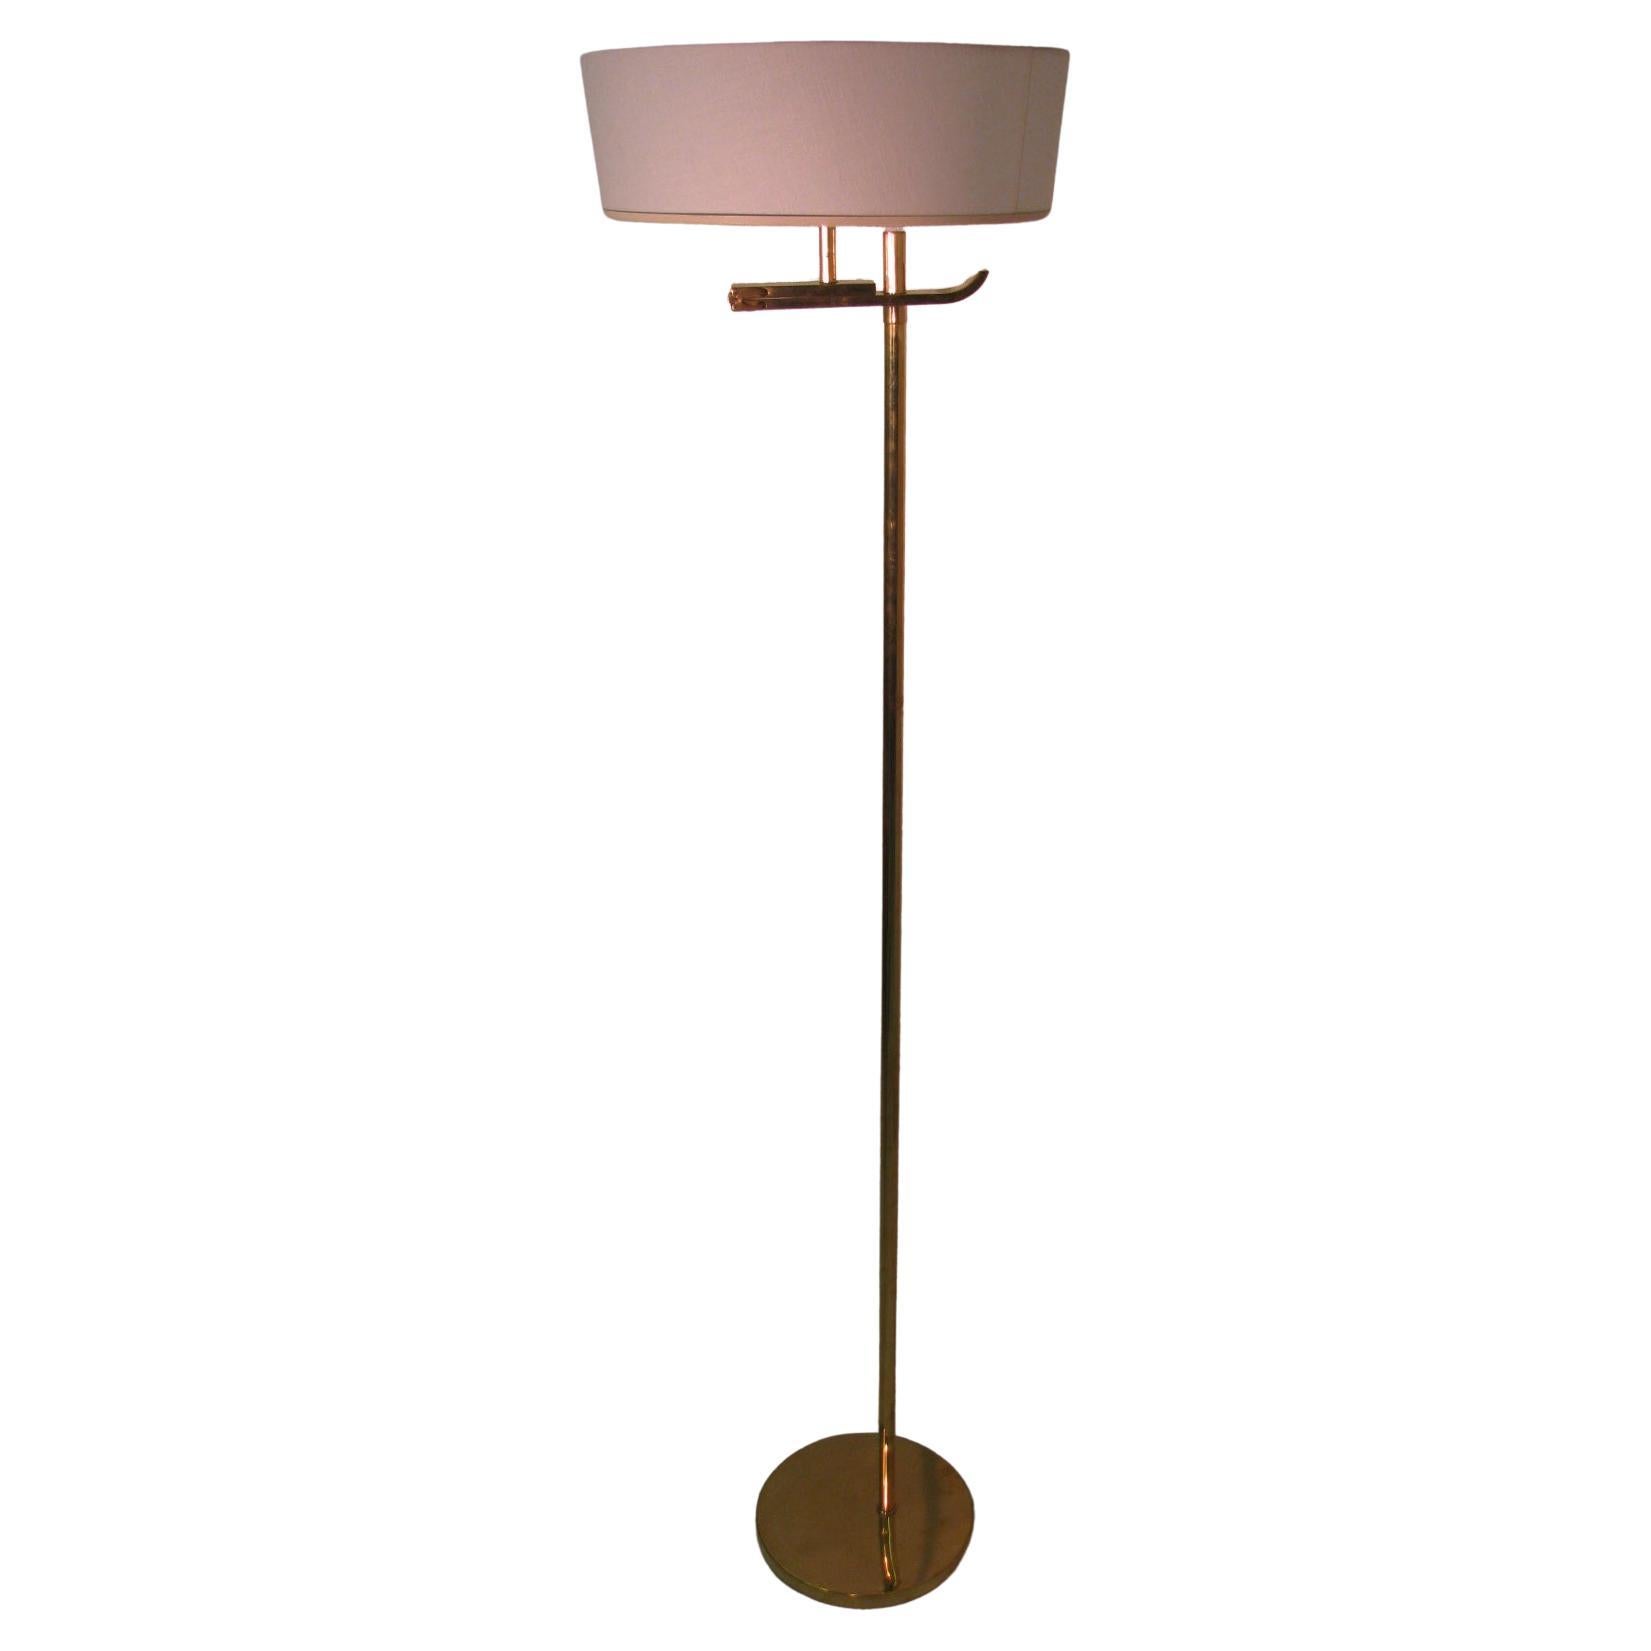 Simple and elegant Flip floor lamp by Kurt Versen. All brasses polished with a new linen shade. Newly rewired with twin sockets. Iconic floor lamp by Kurt Versen which doubles as a reading lamp then shade can be flipped up to create a torchiere.